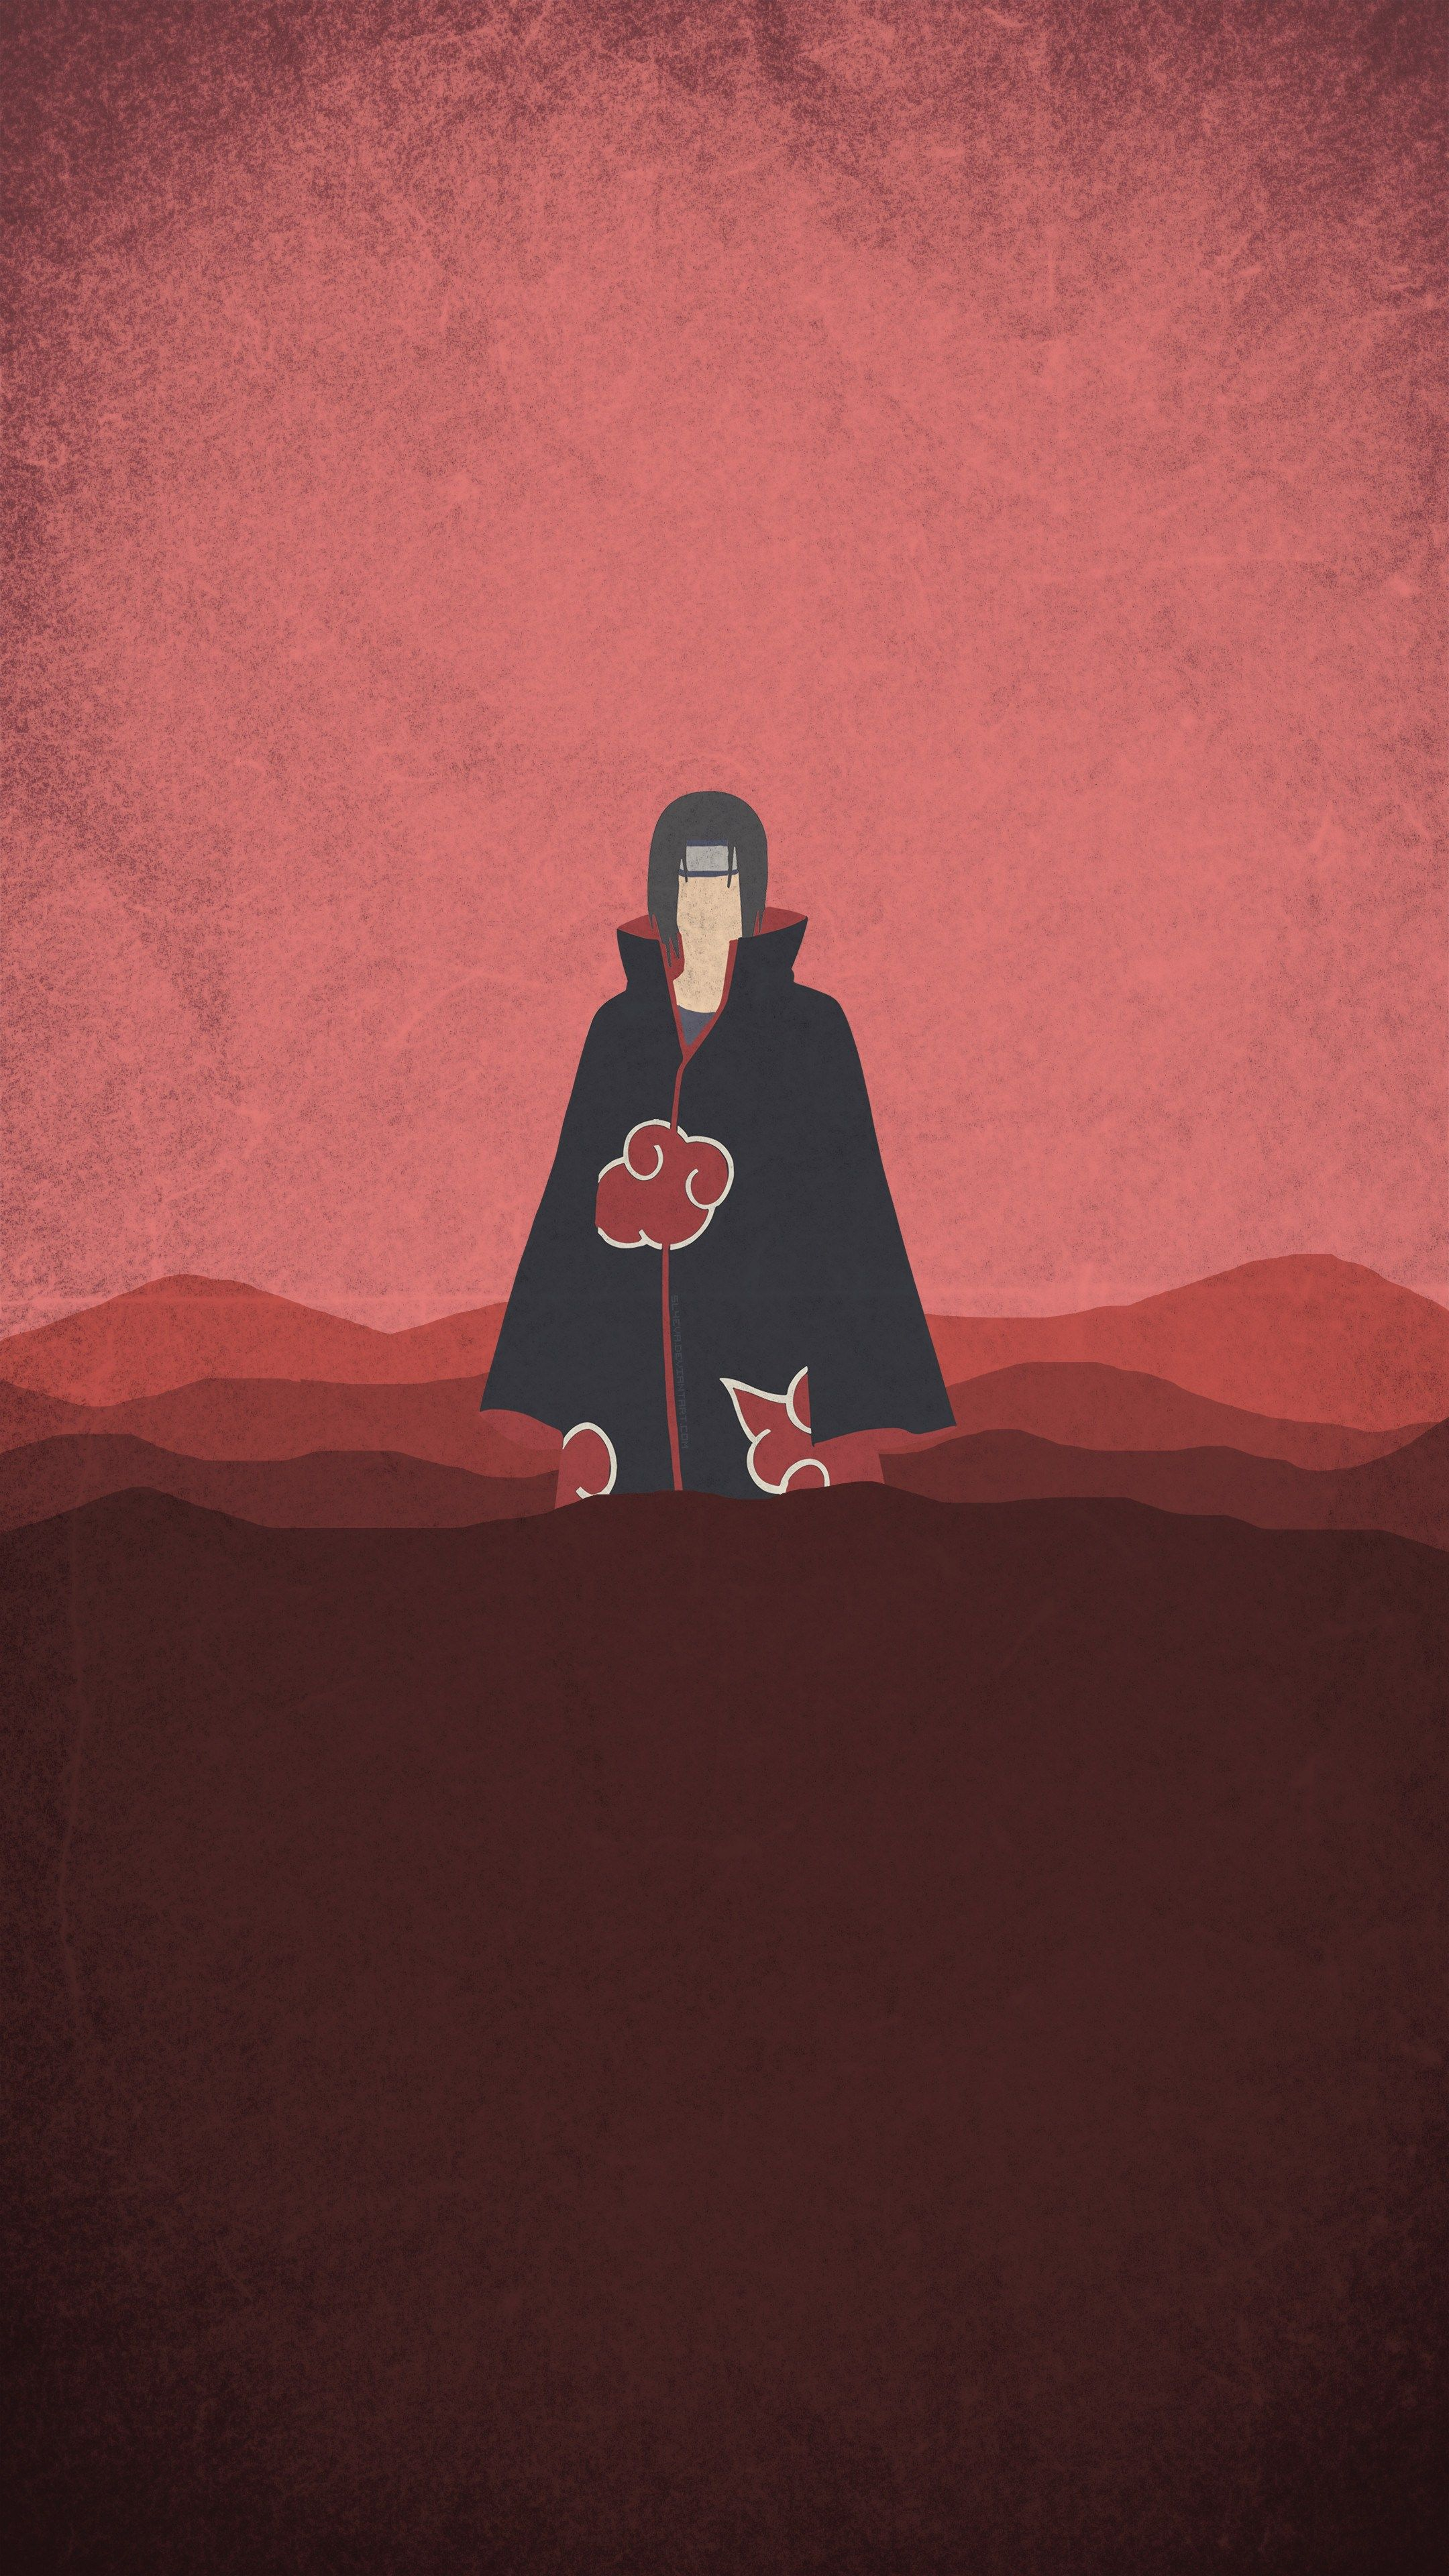 2160x3840 Naruto Wallpaper Iphone 8 Wallpaper abyss page 8. See more ideas about anime naruto backgroun&acirc;&#128;&brvbar; | Itachi uchiha, Naruto wallpaper iphone, Wallpaper naruto shippude